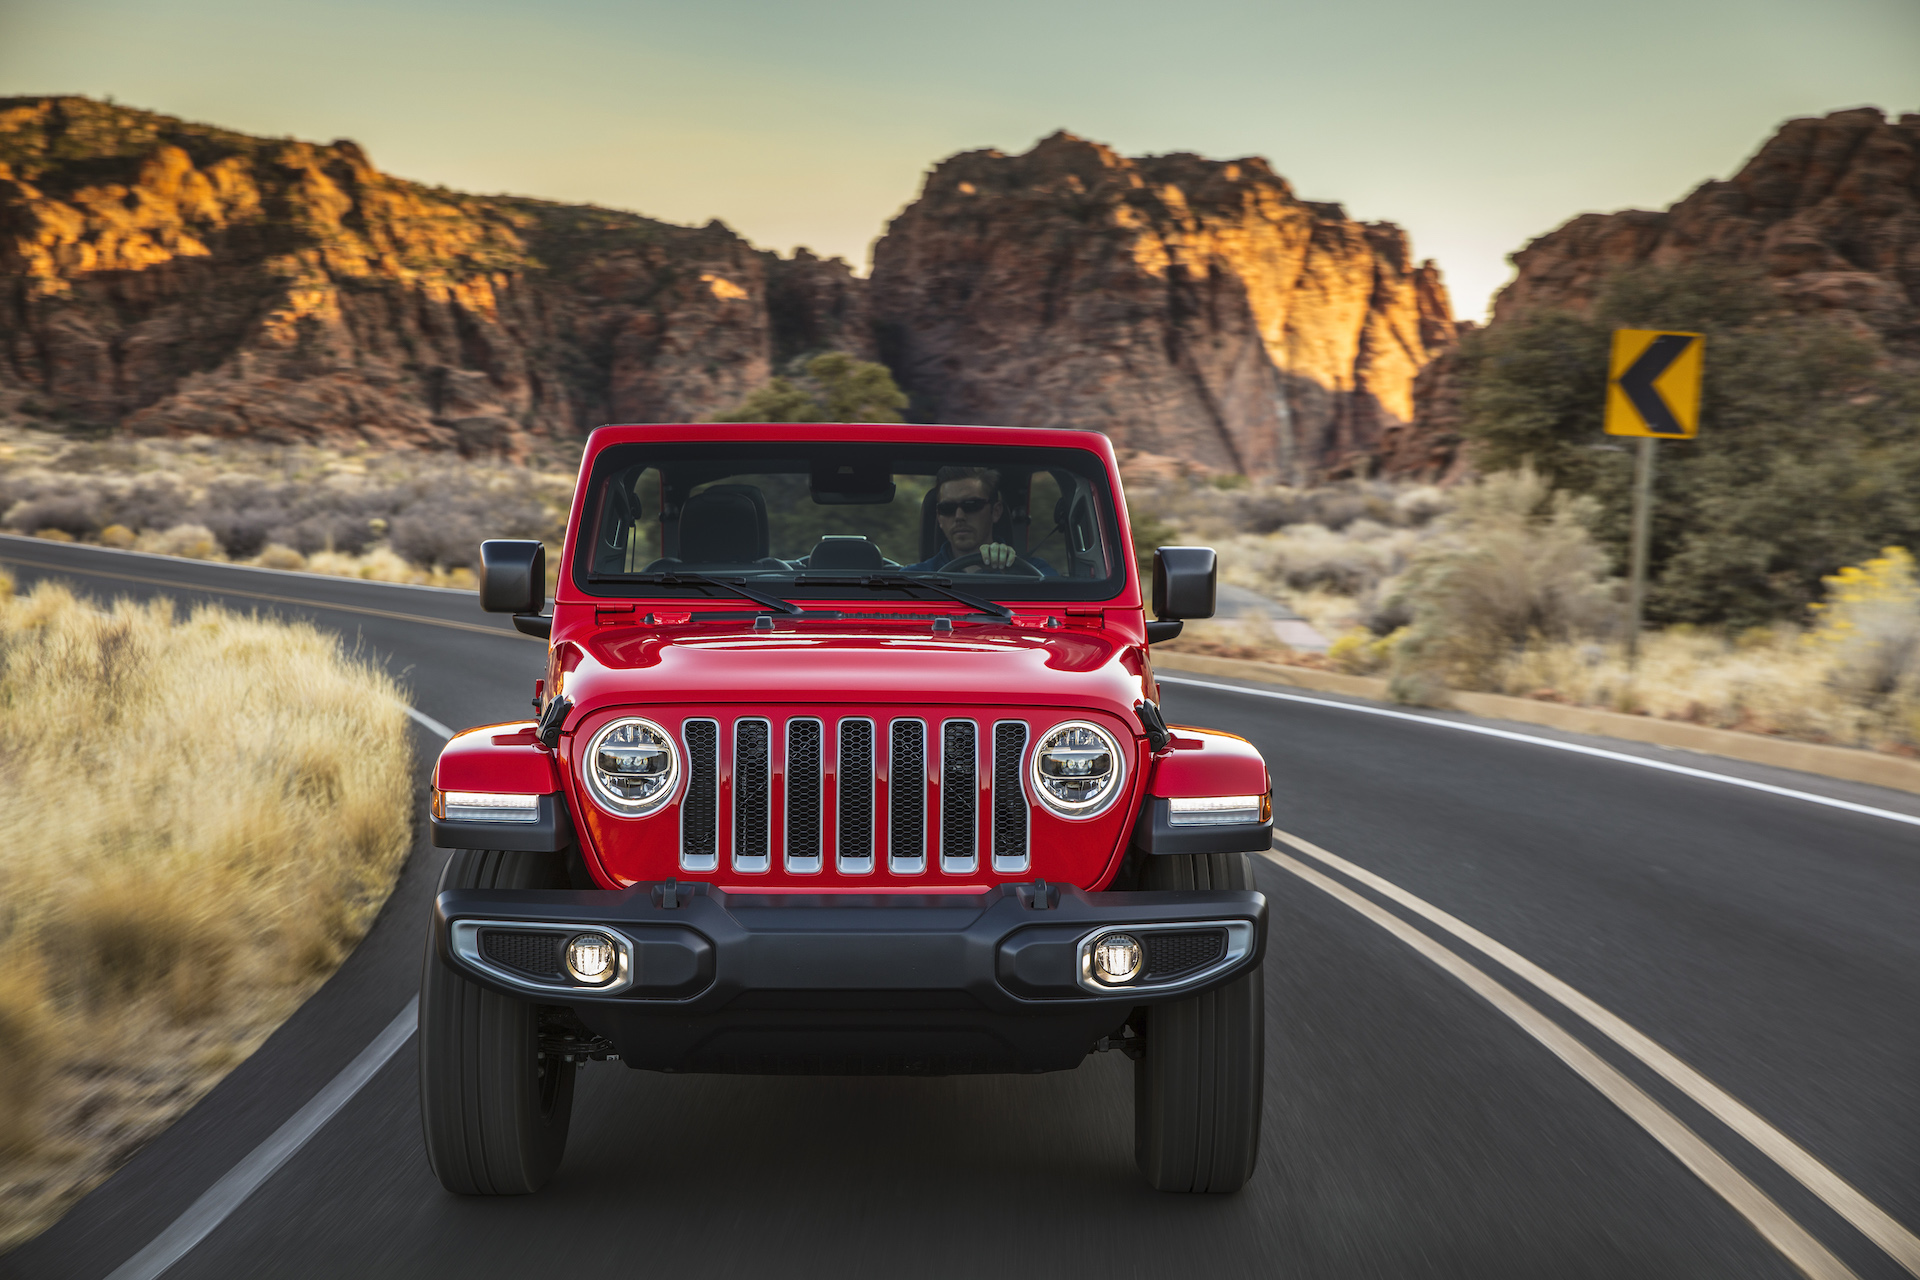 Jeep to present plug-in hybrid Wrangler, Compass and Renegade at 2020 CES